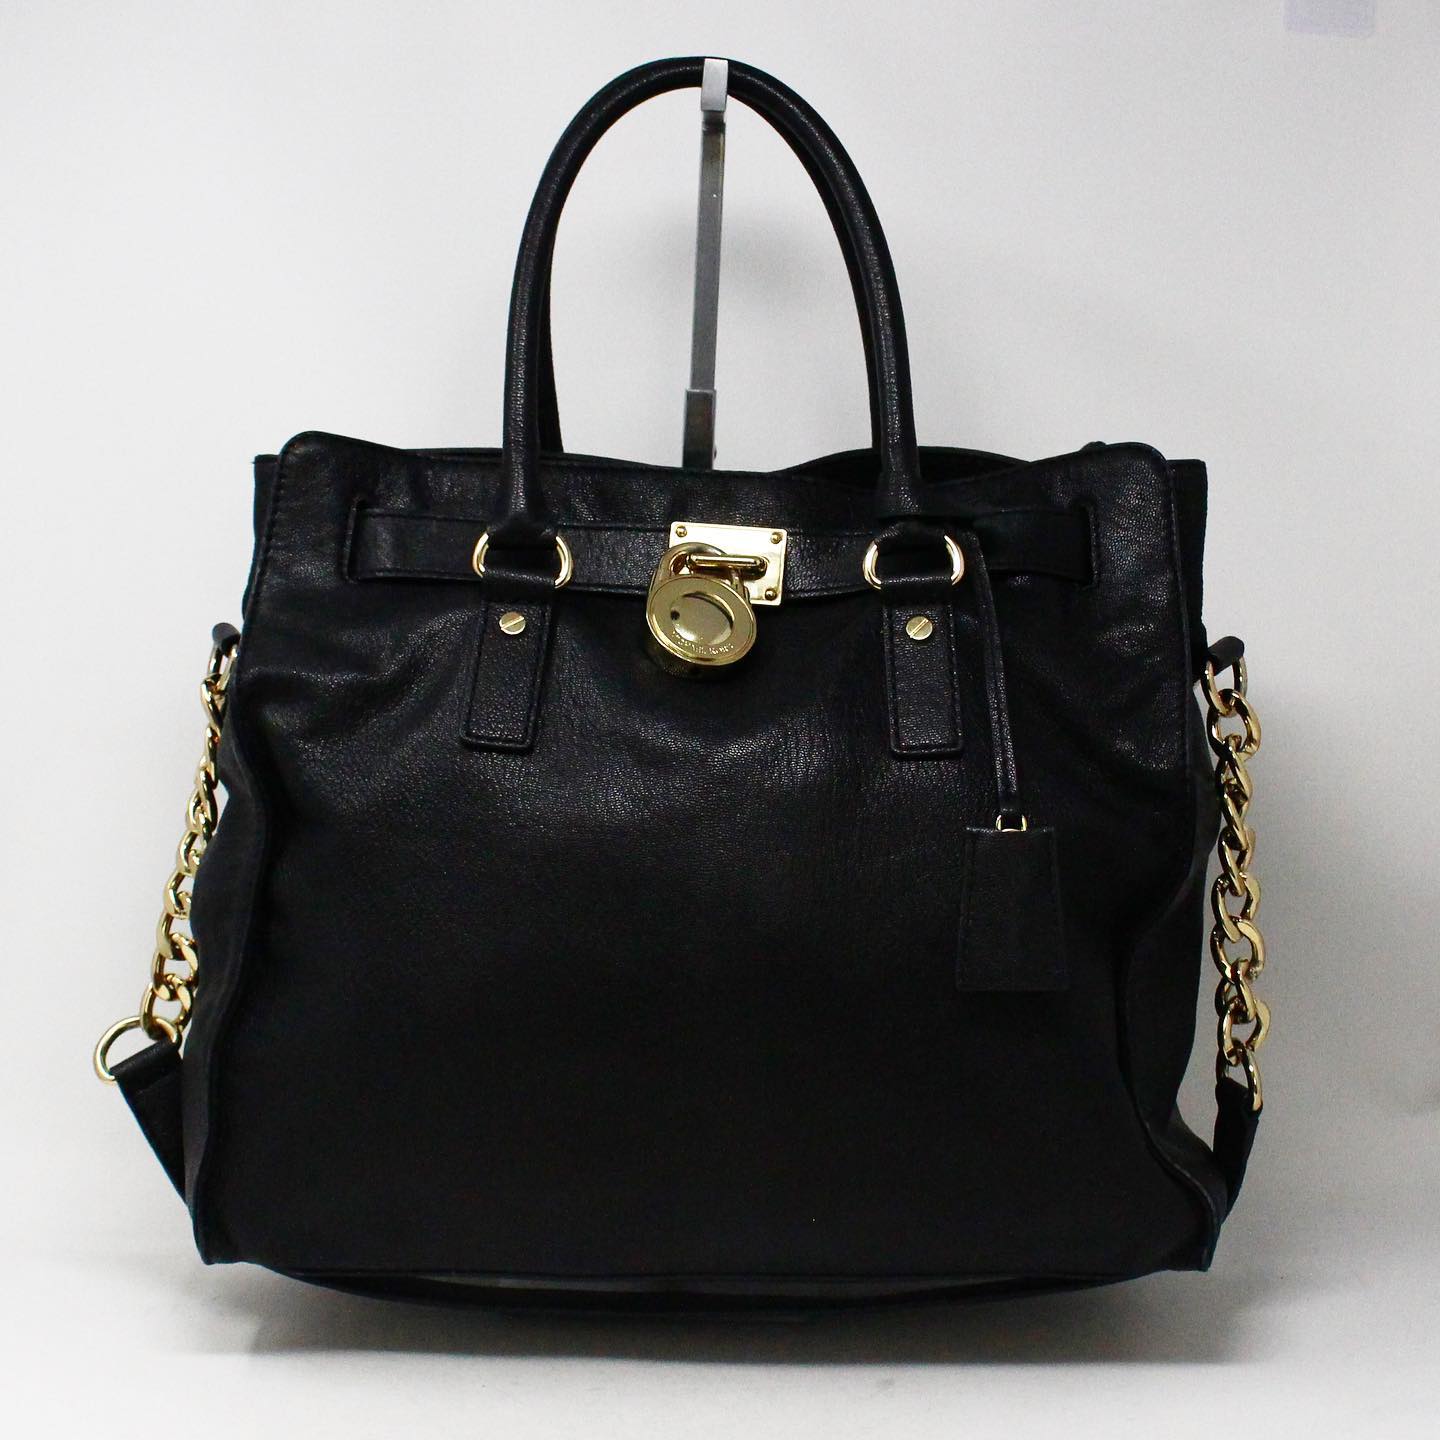 MICHAEL KORS #30935 Black Leather Lock Tote – ALL YOUR BLISS